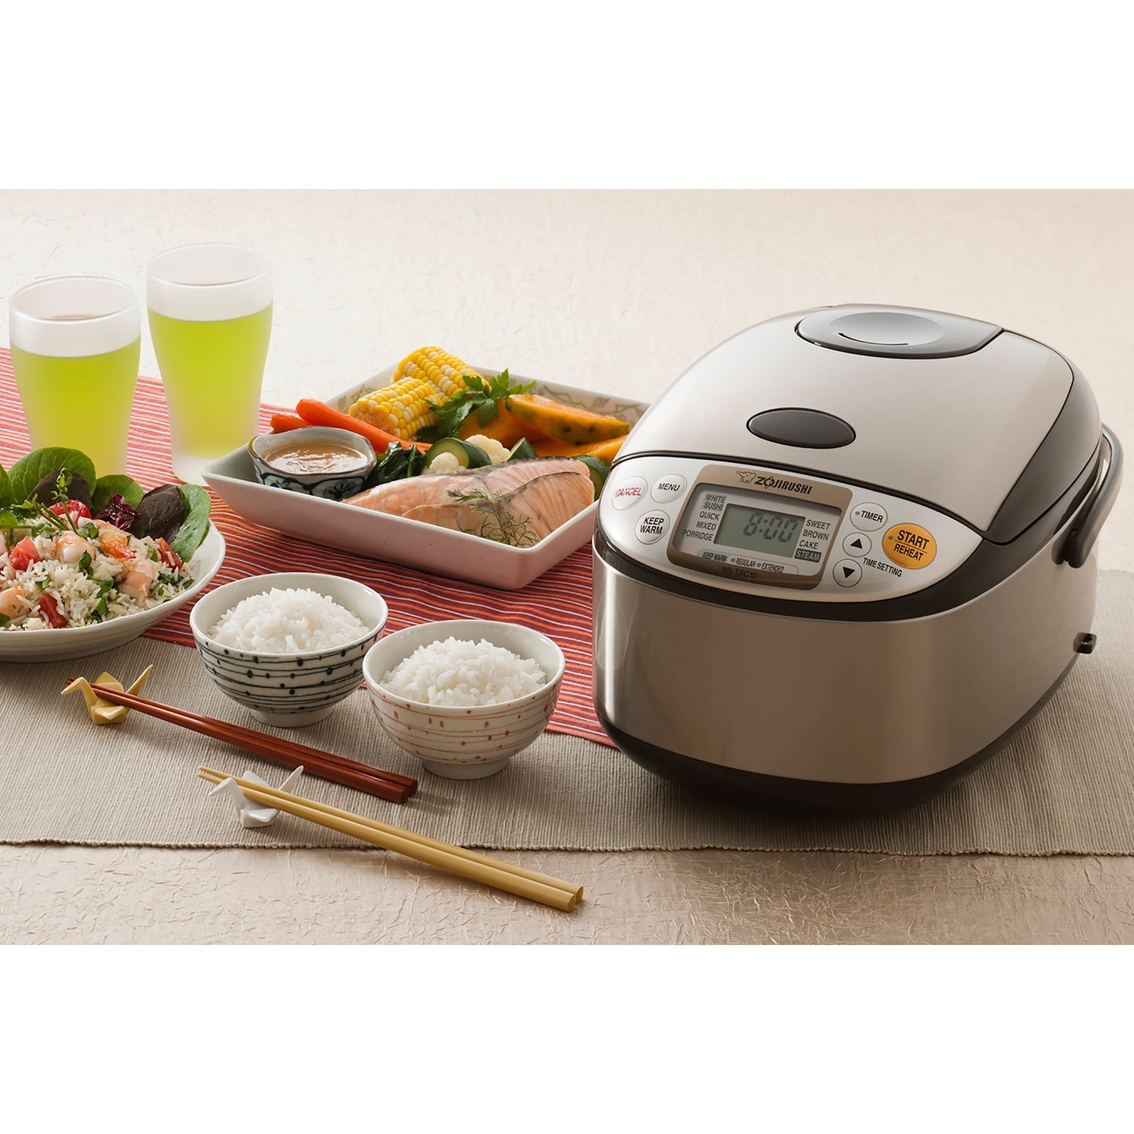 Zojirushi Micom 5.5 Cup Rice Cooker and Warmer - Image 2 of 2